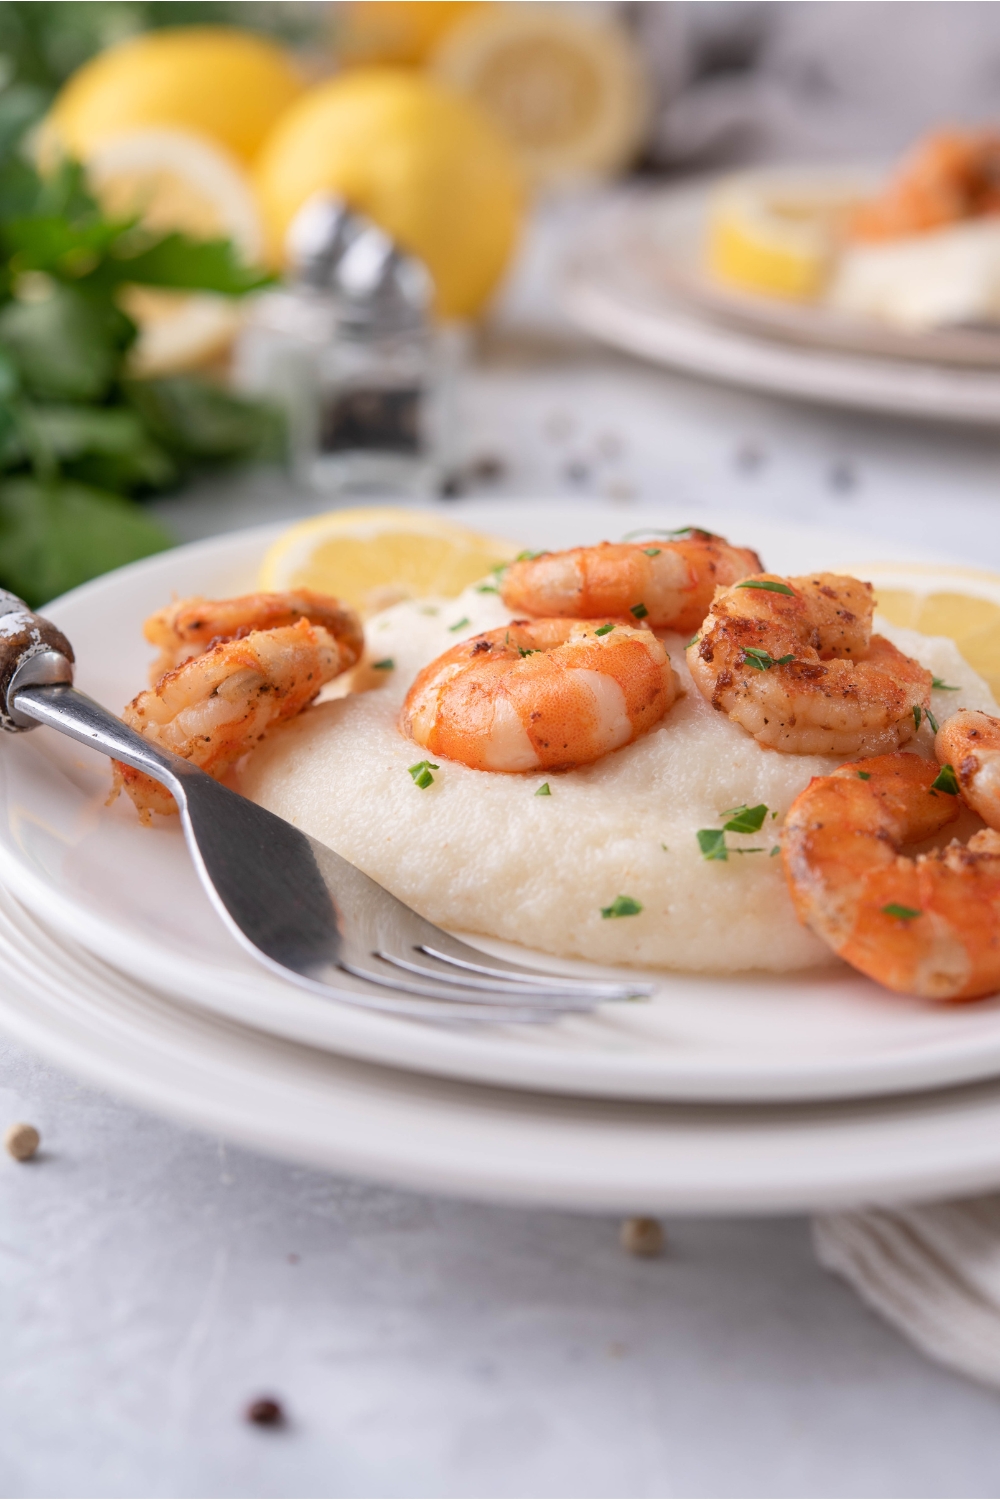 Pan seared shrimp atop grits with a garnish of fresh herbs and a lemon wedge. The plate of shrimp is on a second plate and there is a fork on the plate. In the background are more lemons and a second serving of shrimp.